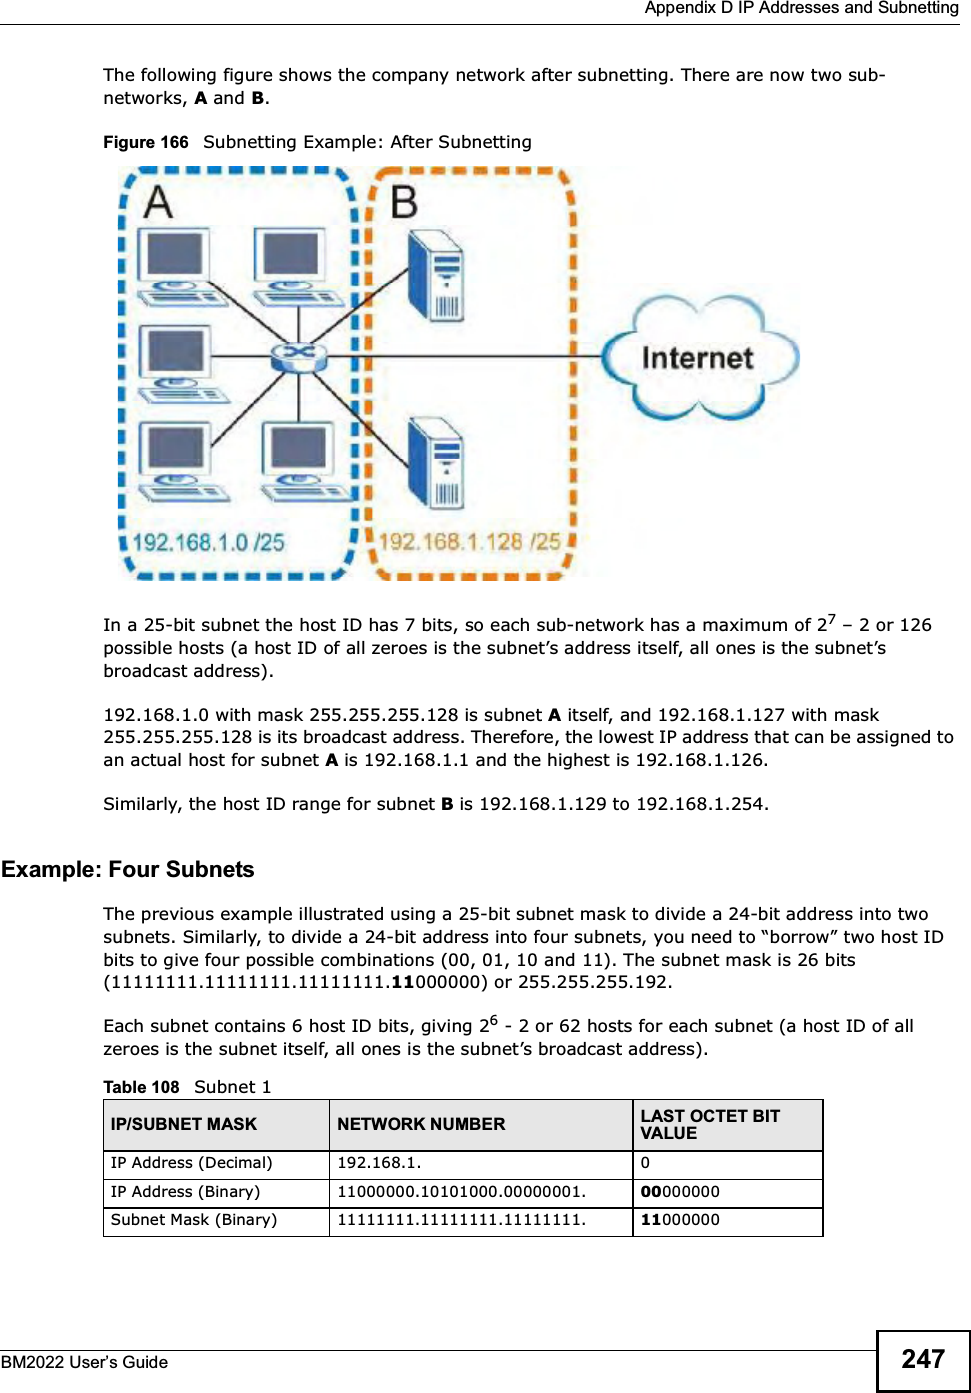  Appendix D IP Addresses and SubnettingBM2022 Users Guide 247The following figure shows the company network after subnetting. There are now two sub-networks, A and B. Figure 166   Subnetting Example: After SubnettingIn a 25-bit subnet the host ID has 7 bits, so each sub-network has a maximum of 27  2 or 126 possible hosts (a host ID of all zeroes is the subnets address itself, all ones is the subnets broadcast address).192.168.1.0 with mask 255.255.255.128 is subnet A itself, and 192.168.1.127 with mask 255.255.255.128 is its broadcast address. Therefore, the lowest IP address that can be assigned to an actual host for subnet A is 192.168.1.1 and the highest is 192.168.1.126. Similarly, the host ID range for subnet B is 192.168.1.129 to 192.168.1.254.Example: Four Subnets The previous example illustrated using a 25-bit subnet mask to divide a 24-bit address into two subnets. Similarly, to divide a 24-bit address into four subnets, you need to borrow two host ID bits to give four possible combinations (00, 01, 10 and 11). The subnet mask is 26 bits (11111111.11111111.11111111.11000000) or 255.255.255.192. Each subnet contains 6 host ID bits, giving 26 - 2 or 62 hosts for each subnet (a host ID of all zeroes is the subnet itself, all ones is the subnets broadcast address). Table 108   Subnet 1IP/SUBNET MASK NETWORK NUMBER LAST OCTET BIT VALUEIP Address (Decimal) 192.168.1. 0IP Address (Binary) 11000000.10101000.00000001. 00000000Subnet Mask (Binary) 11111111.11111111.11111111. 11000000